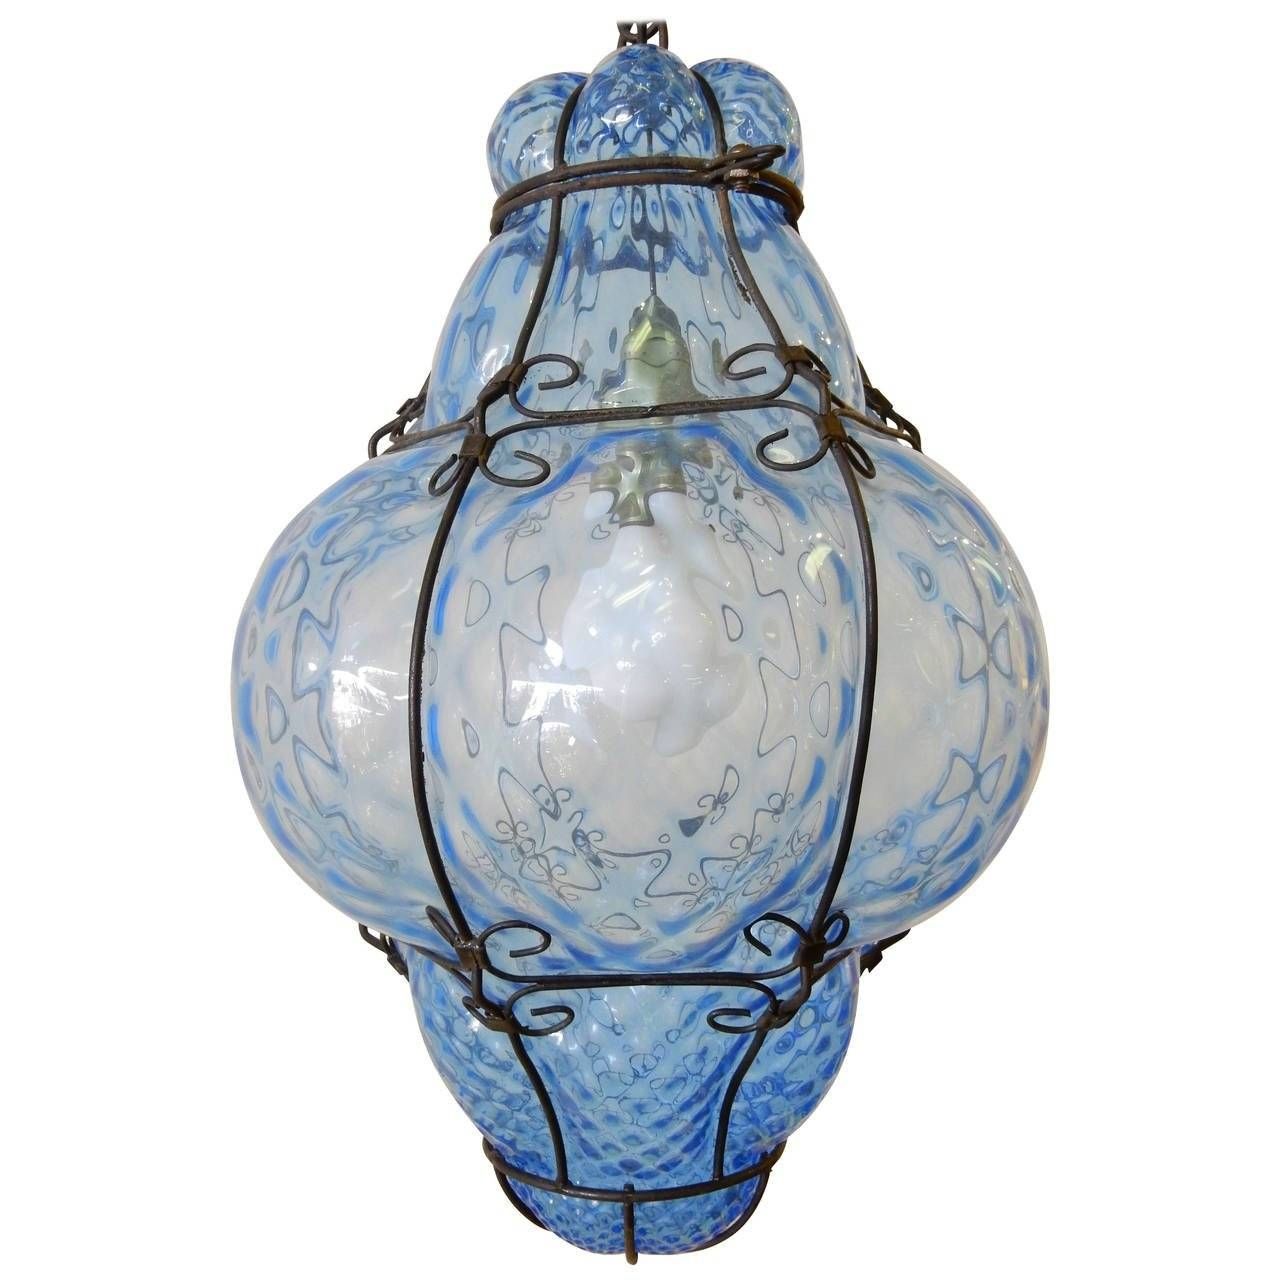 Italian Cage Art Glass Pendant Lampseugso In Aqua Blue At 1stdibs Within Blue Glass Pendant Lights (View 13 of 15)